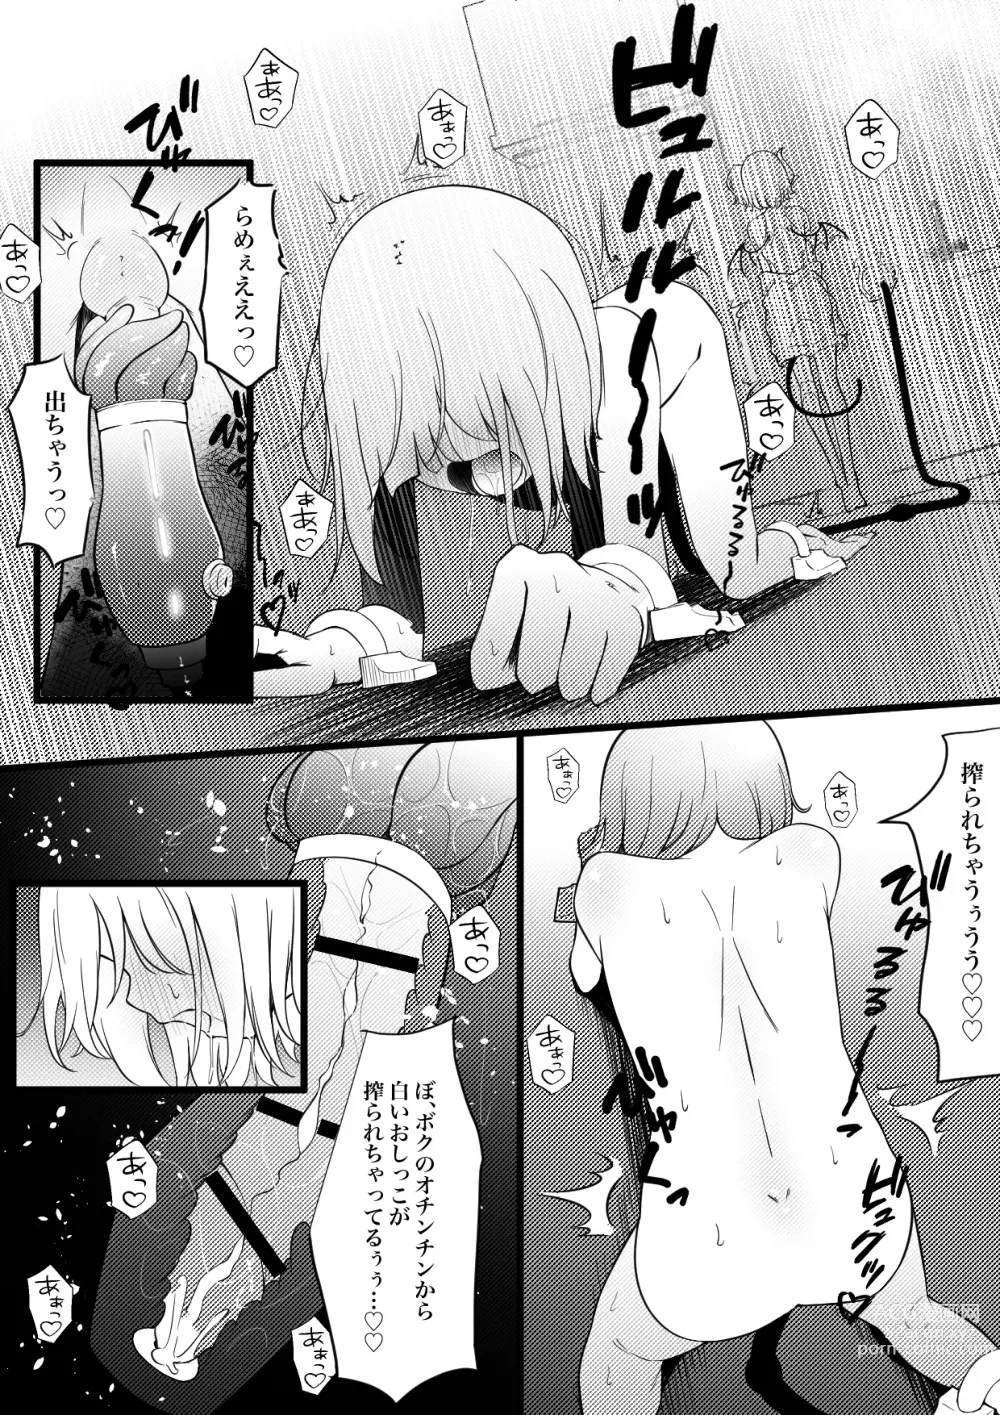 Page 9 of doujinshi permission